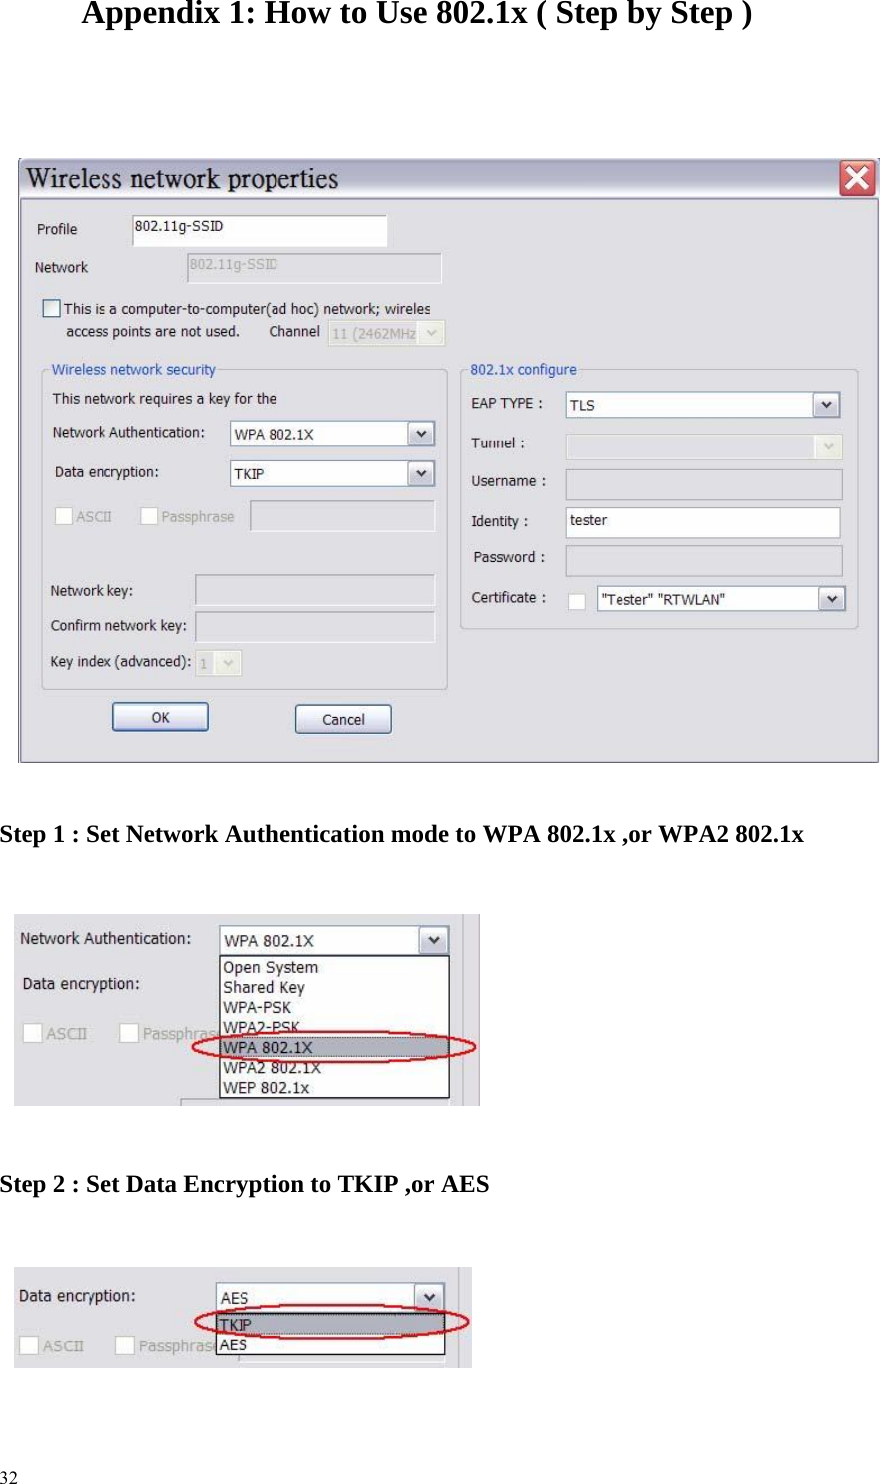  Appendix 1: How to Use 802.1x ( Step by Step )                                    Step 1 : Set Network Authentication mode to WPA 802.1x ,or WPA2 802.1x                   Step 2 : Set Data Encryption to TKIP ,or AES                 32  